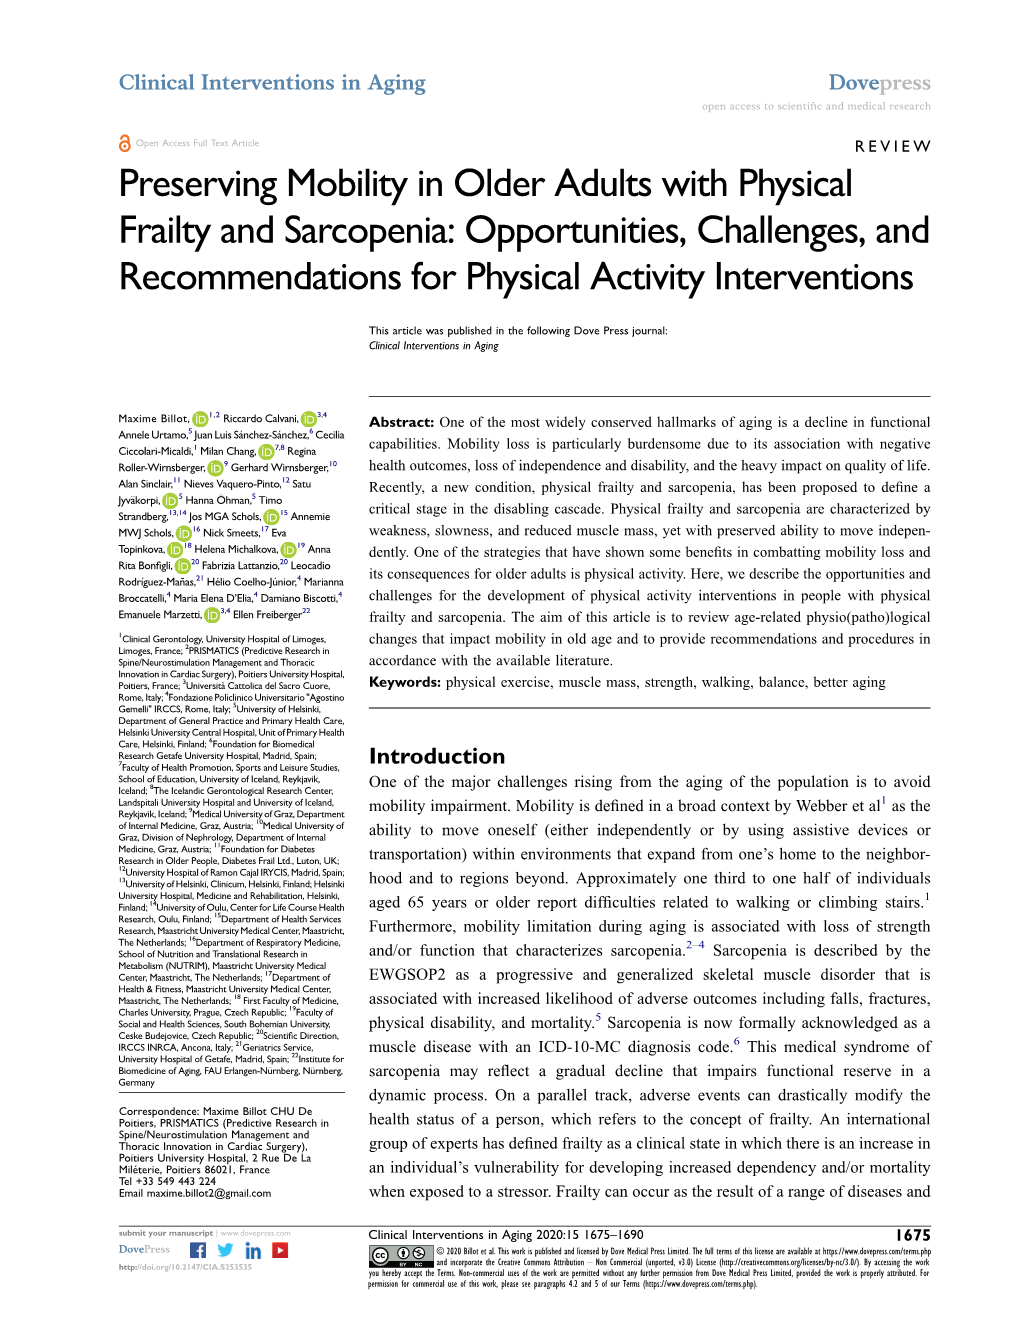 Preserving Mobility in Older Adults with Physical Frailty and Sarcopenia: Opportunities, Challenges, and Recommendations for Physical Activity Interventions